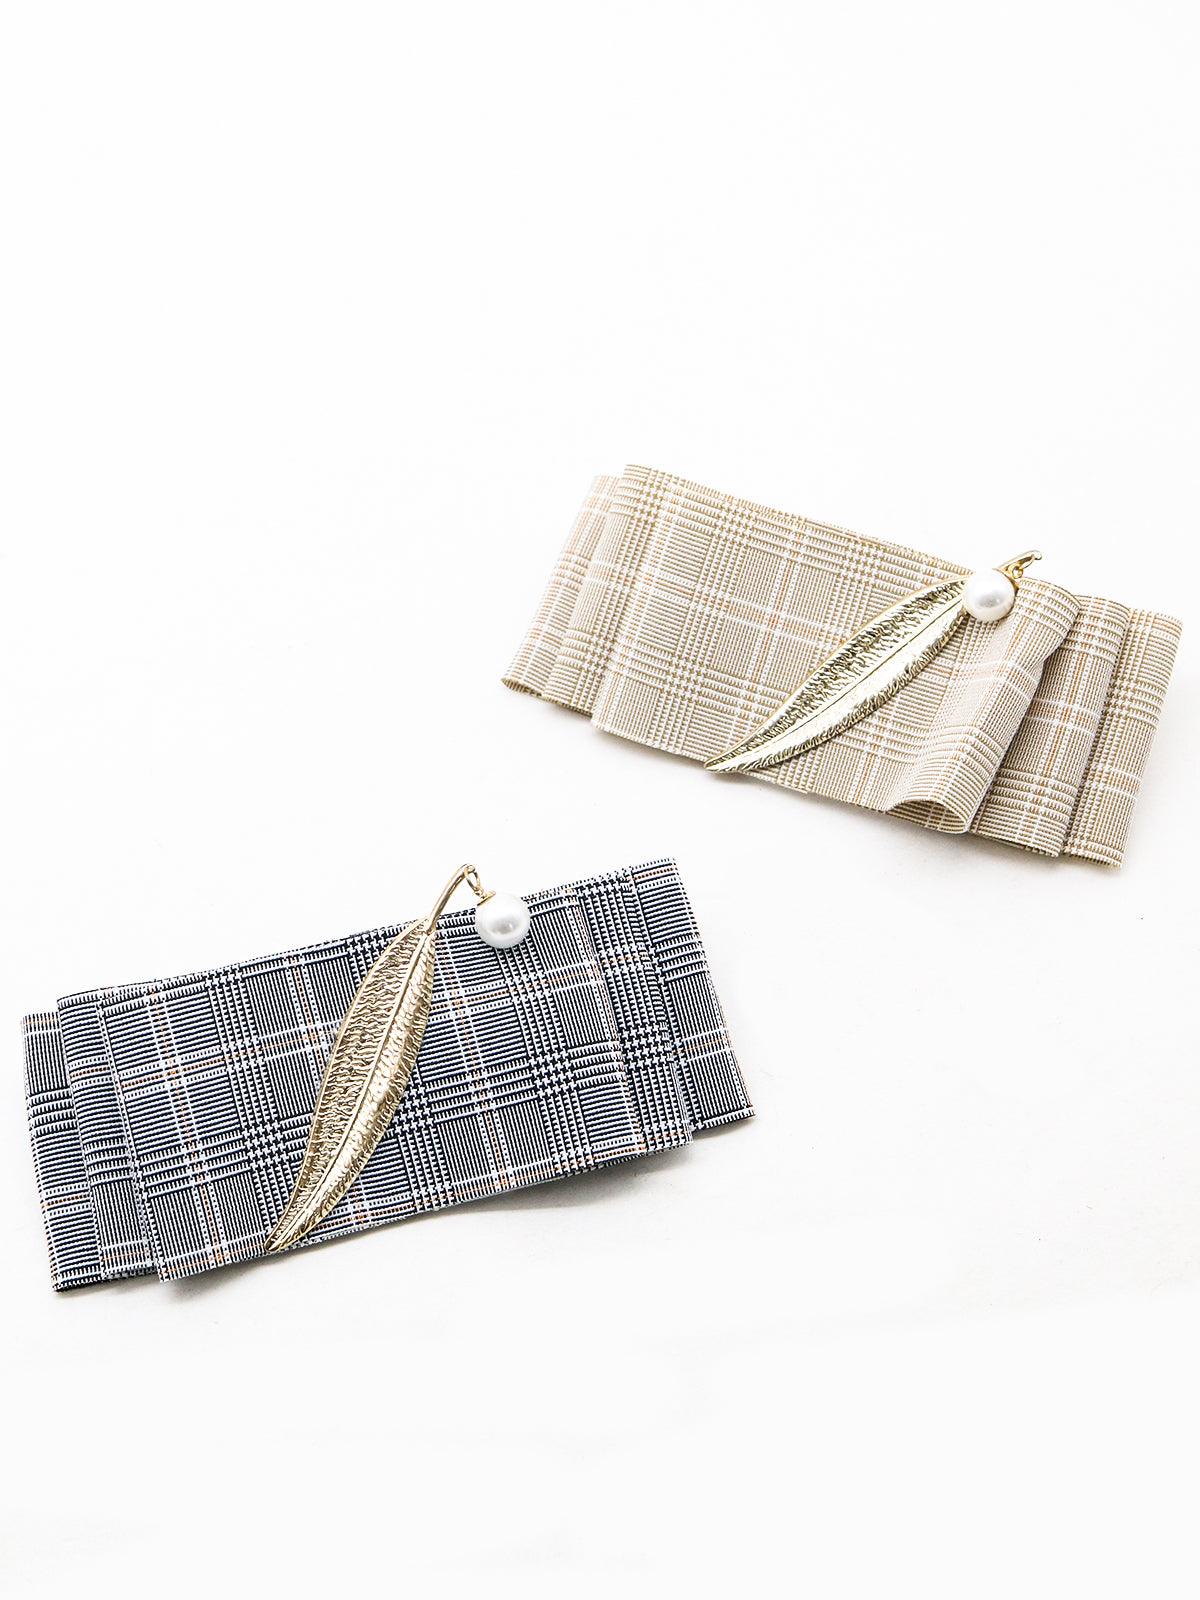 Checkered Set of Two Beige-Grey Barrette Clips - Odette